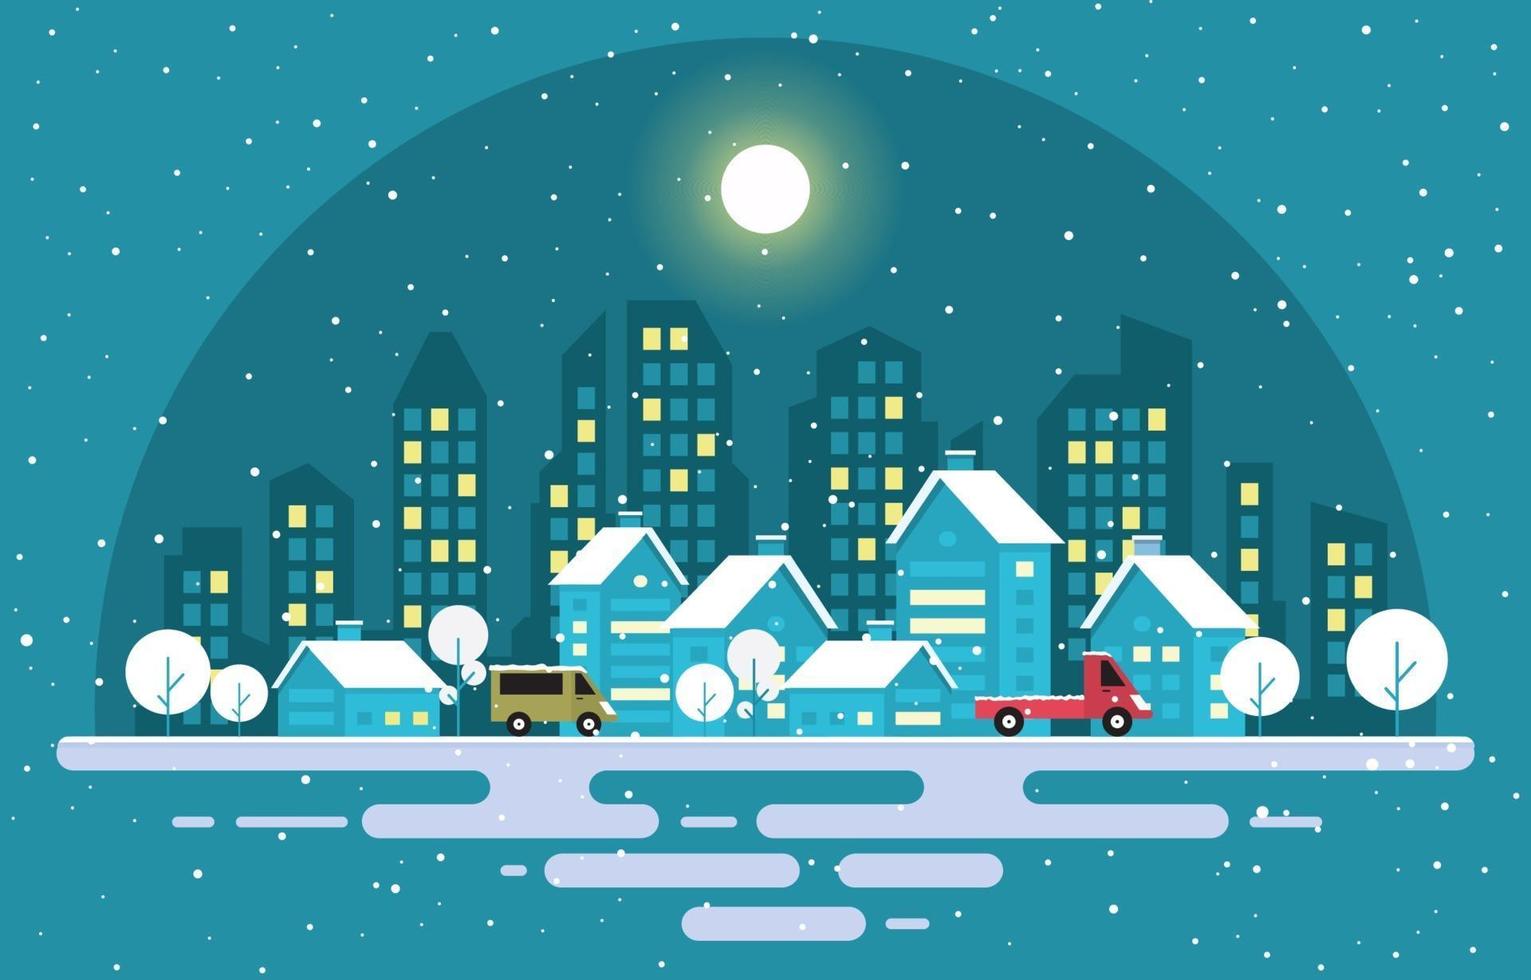 Cozy Snowy Winter City Scene with Trees, Homes, and Cars vector